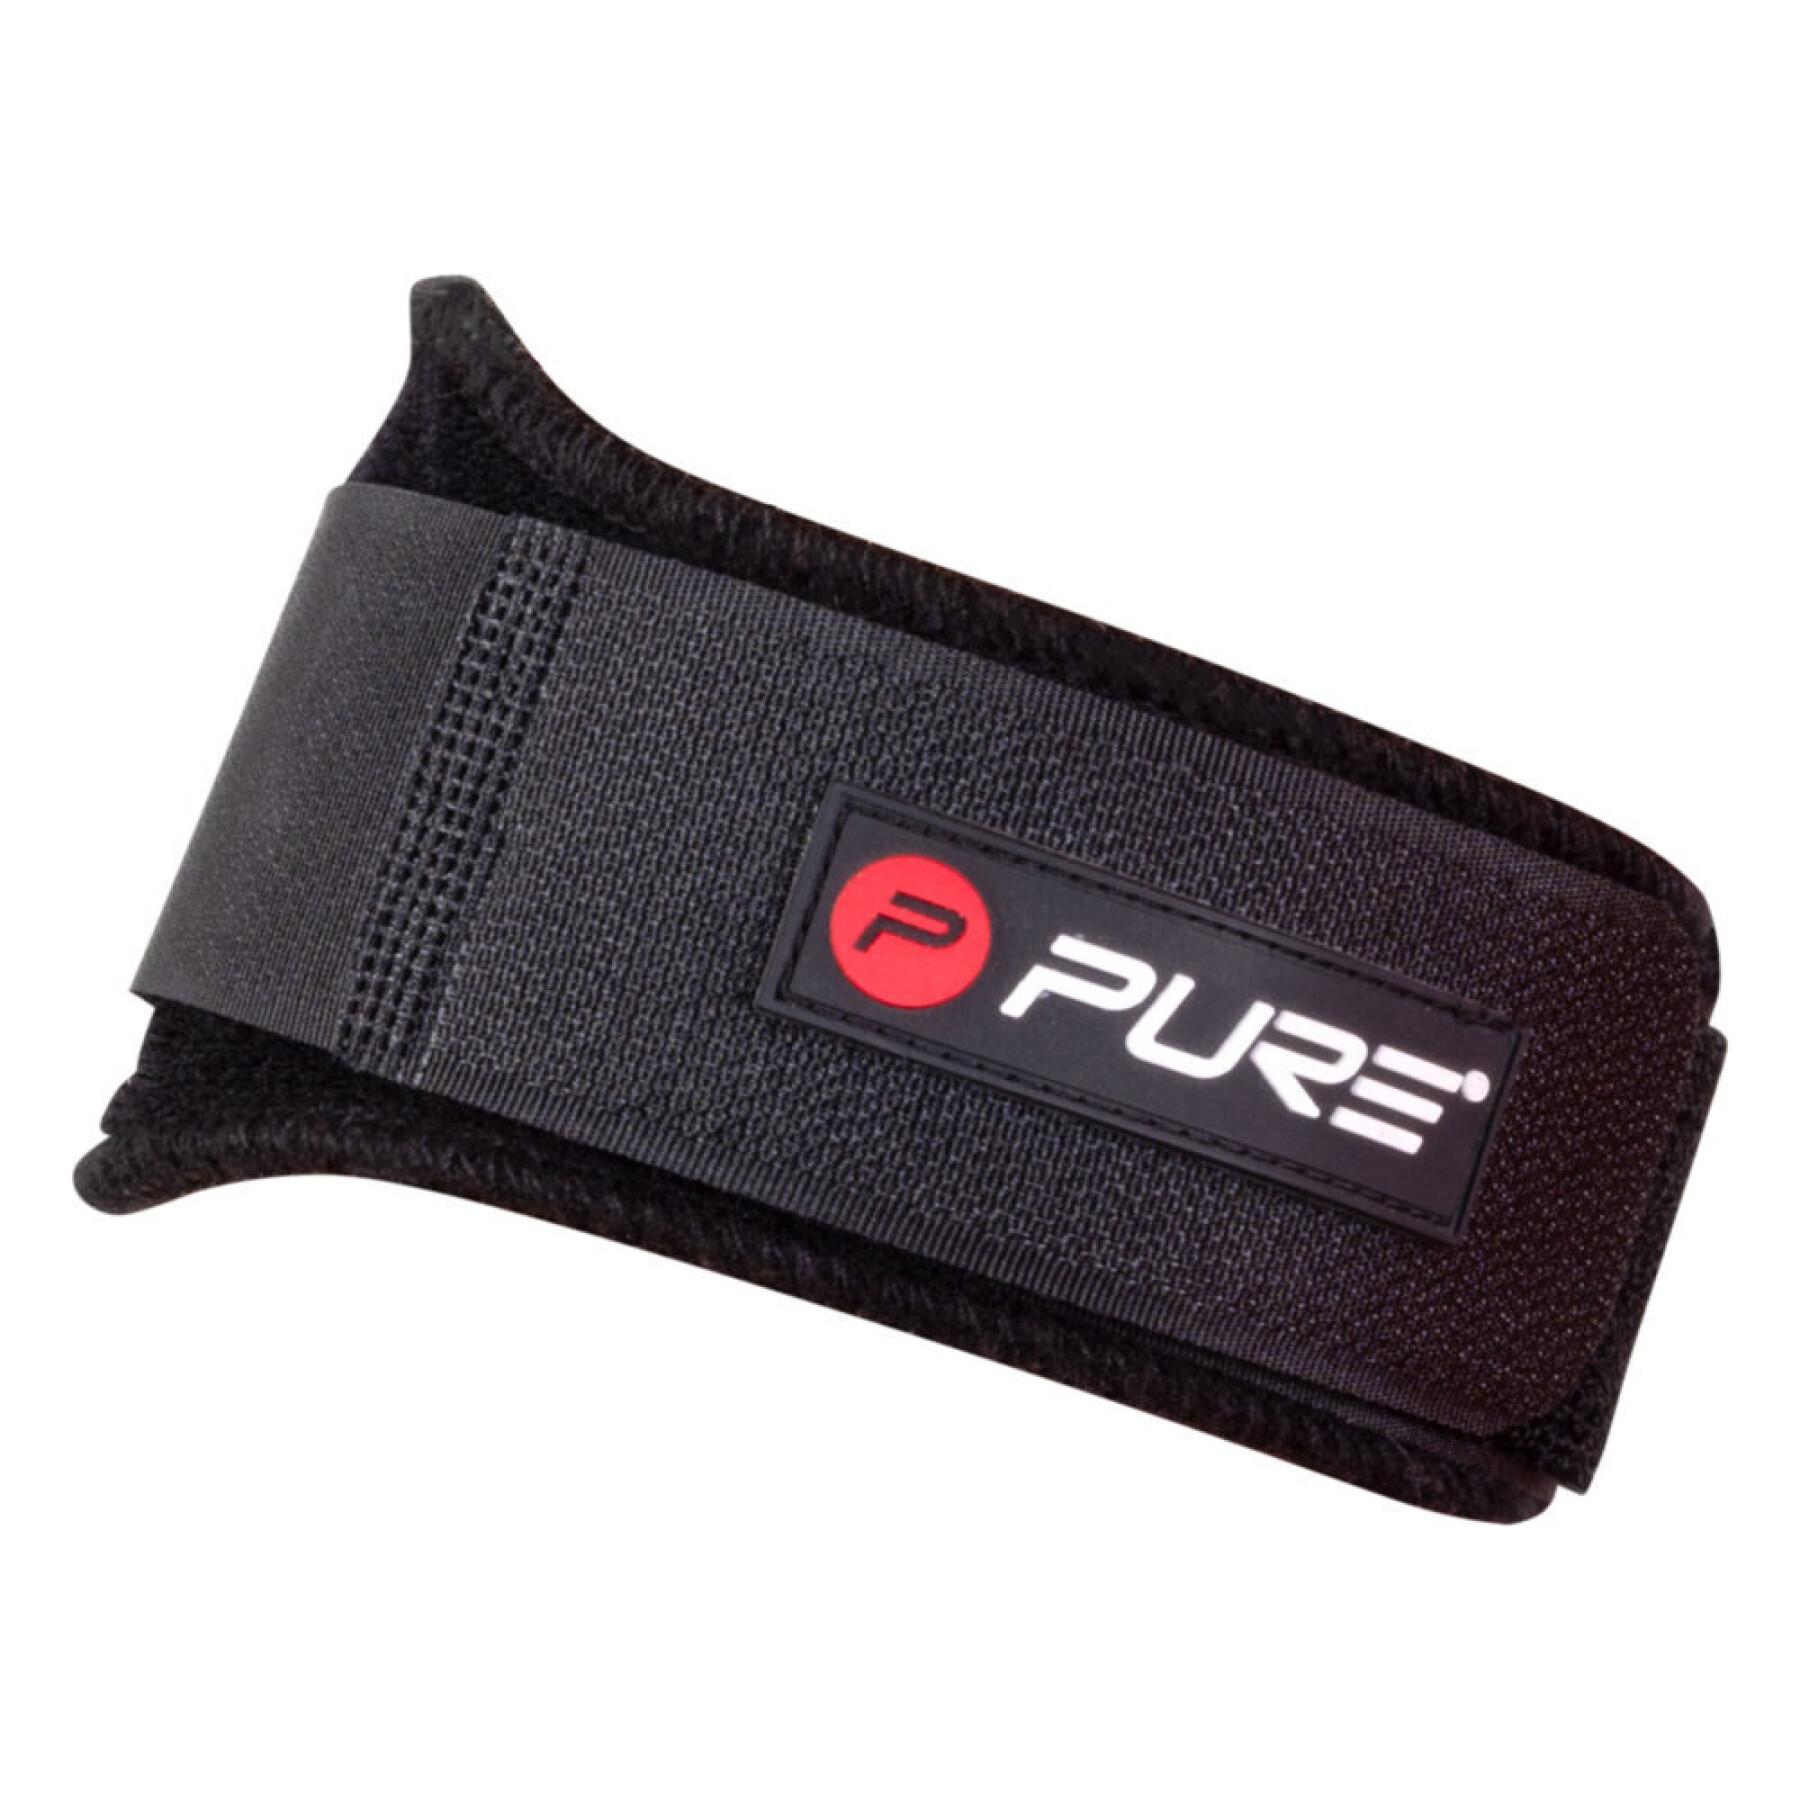 Adjustable elbow support band Pure2Improve